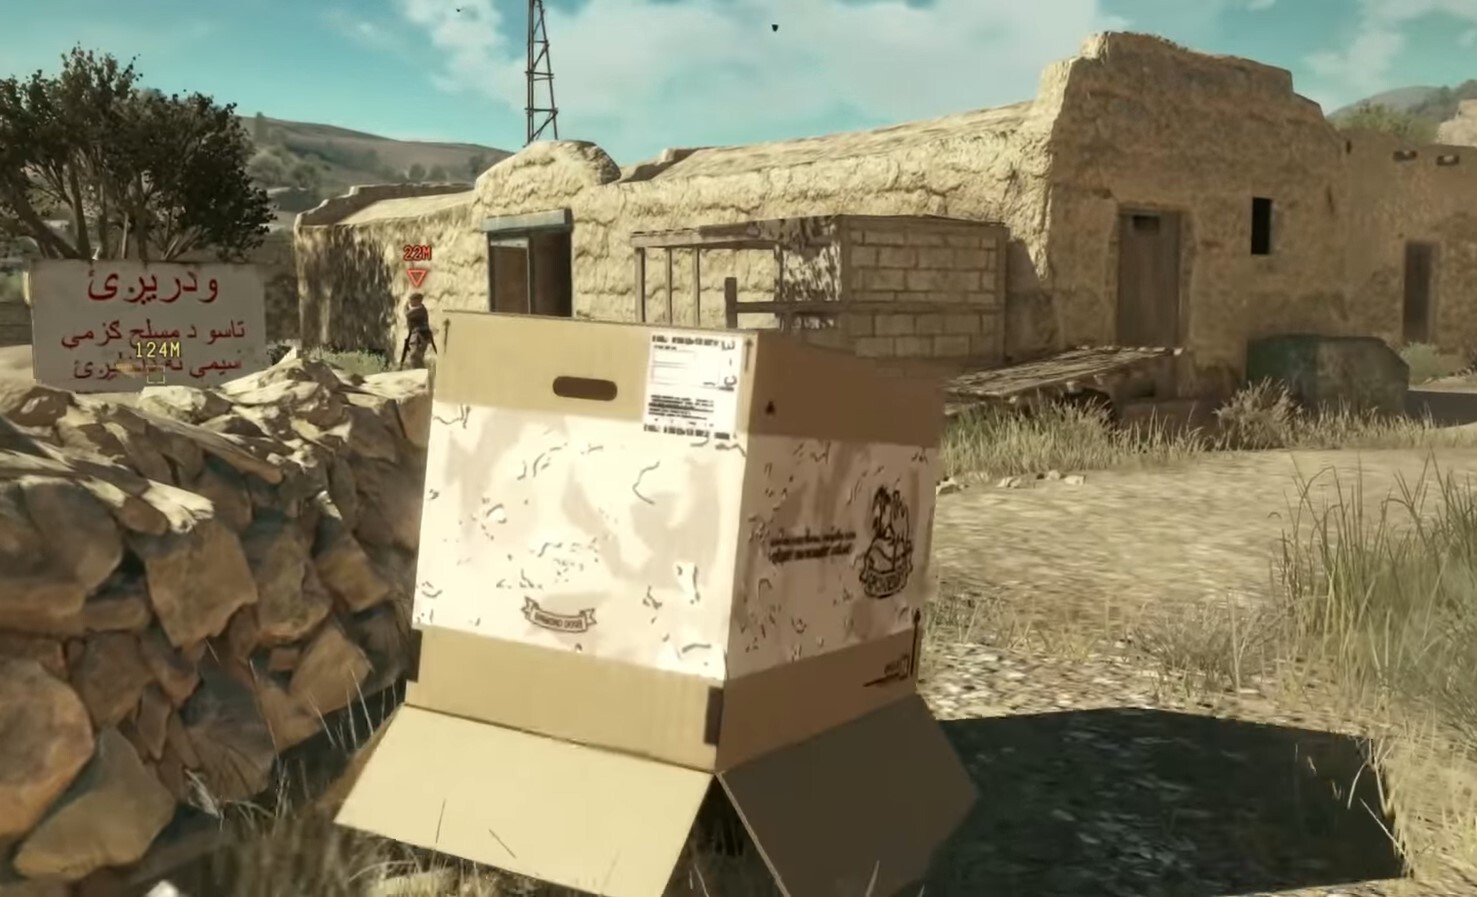 Solid Snake hides in a cardboard box to avoid detection by enemies. (Photo: Screenshot/Konami)